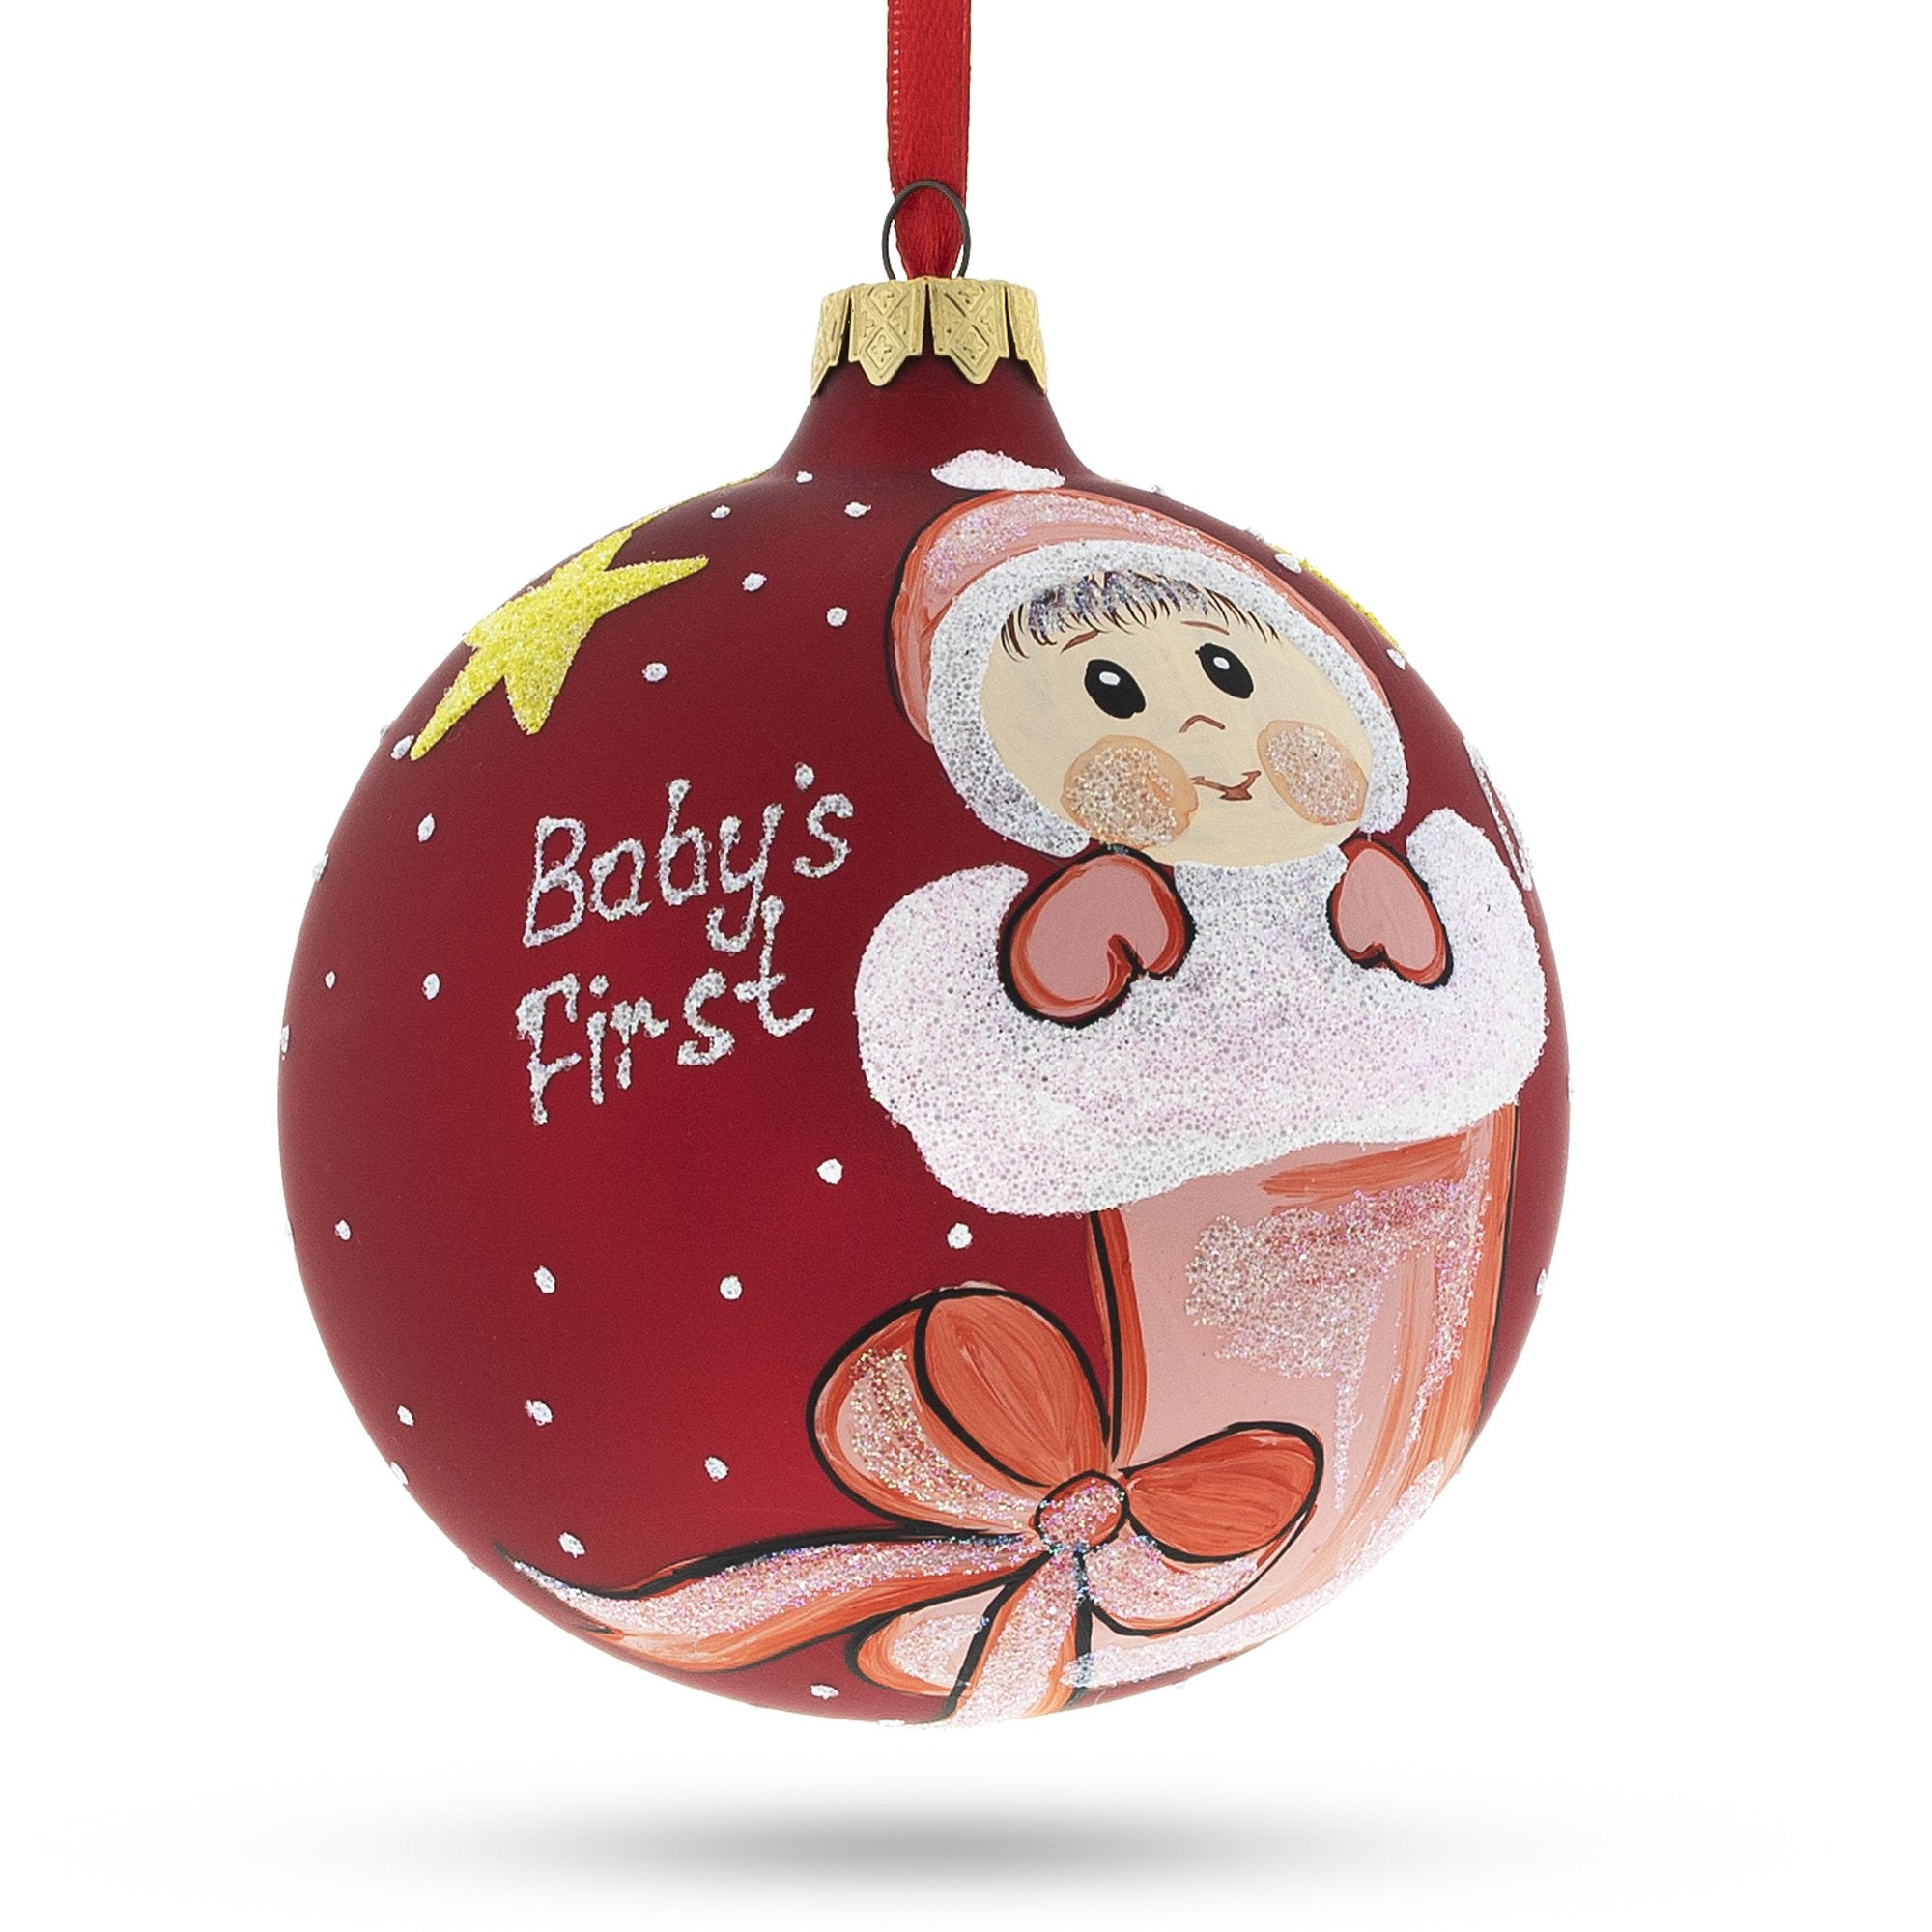 Charming Girl In Festive Christmas Stocking Blown Glass Ball Baby's First Christmas Ornament 4 Inches